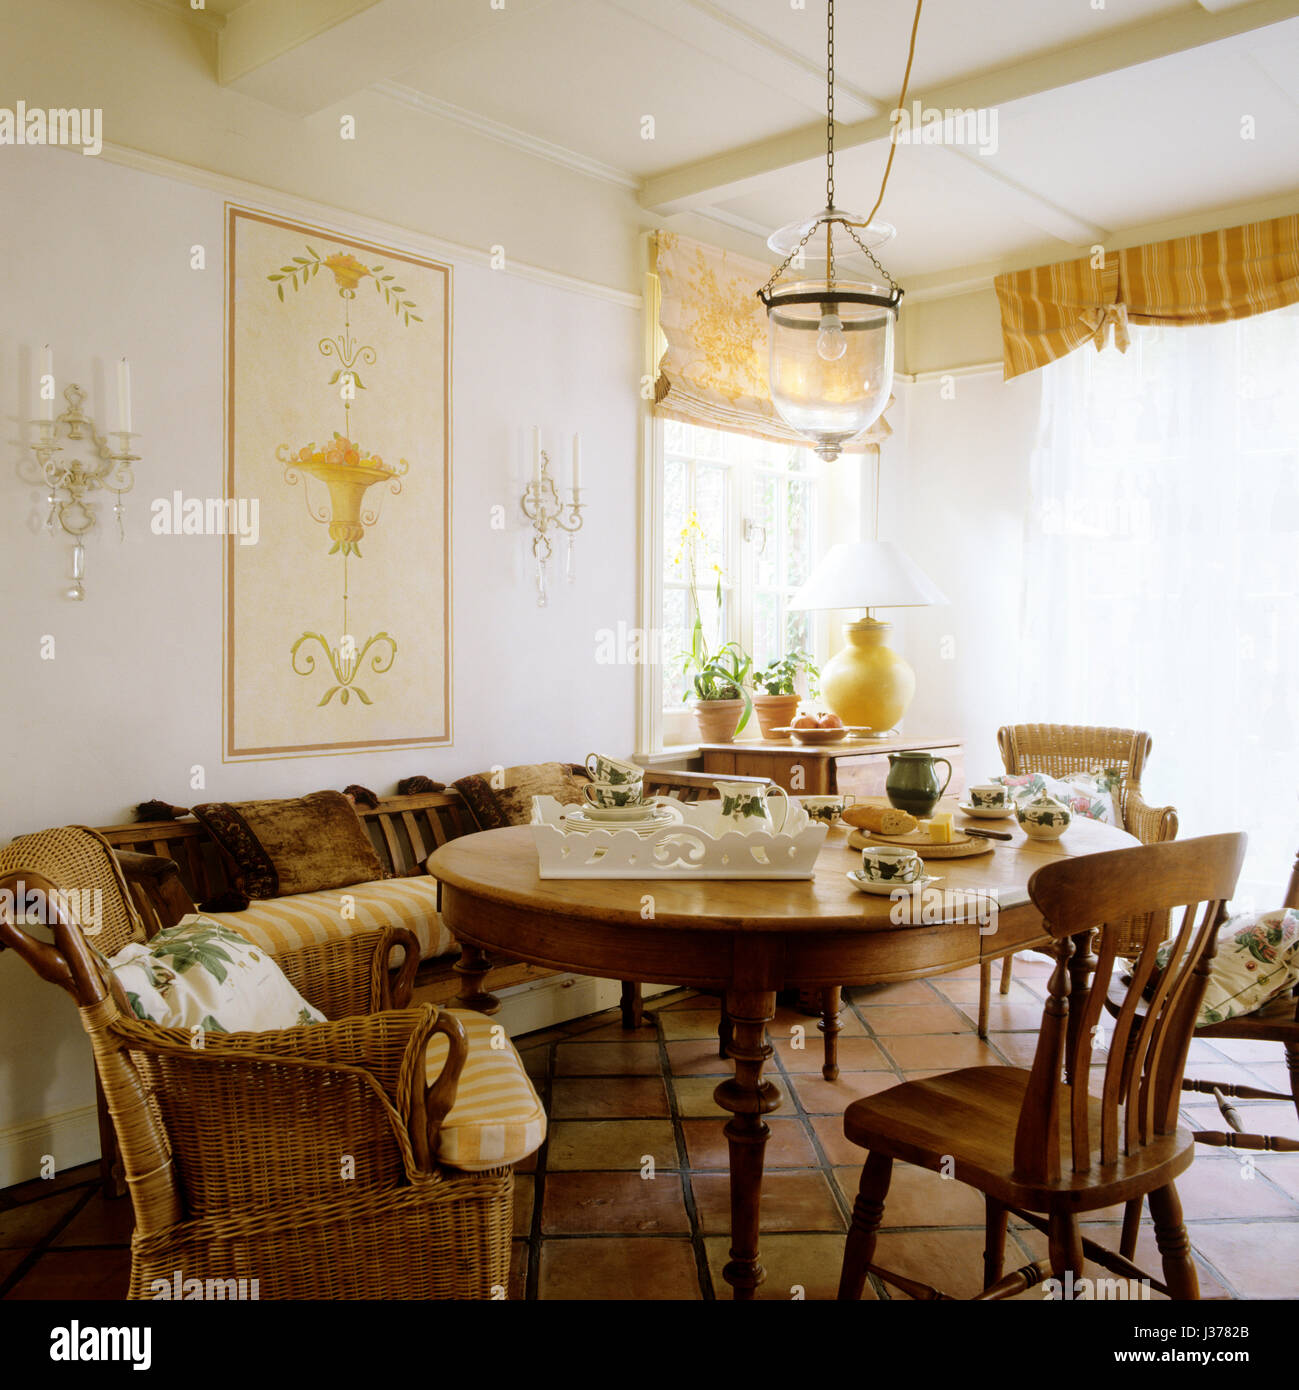 Country style dining room. Stock Photo